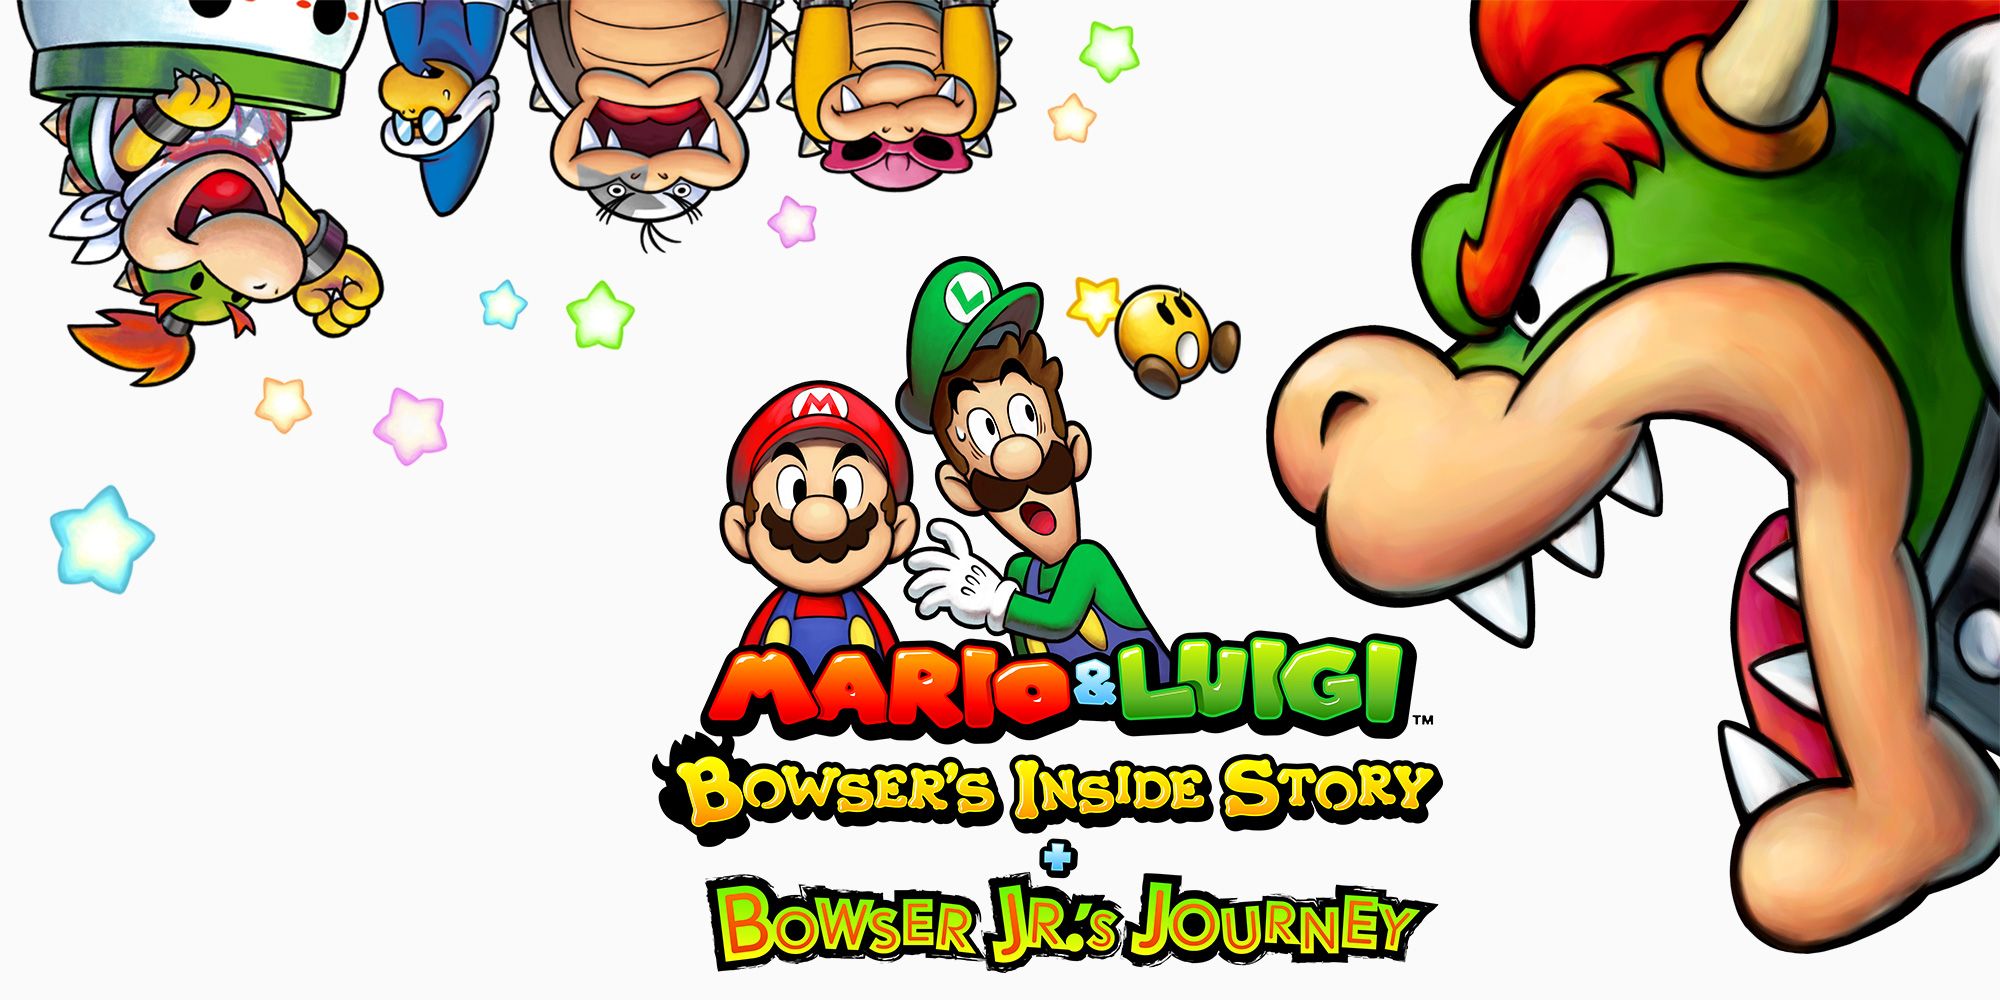 Mario And Luigi Bowsers Inside Story Plus Bowser Jr's Journey game poster, with Mario and Luigi looking spooked, and Bowser yelling at them from the right side while his children laugh above